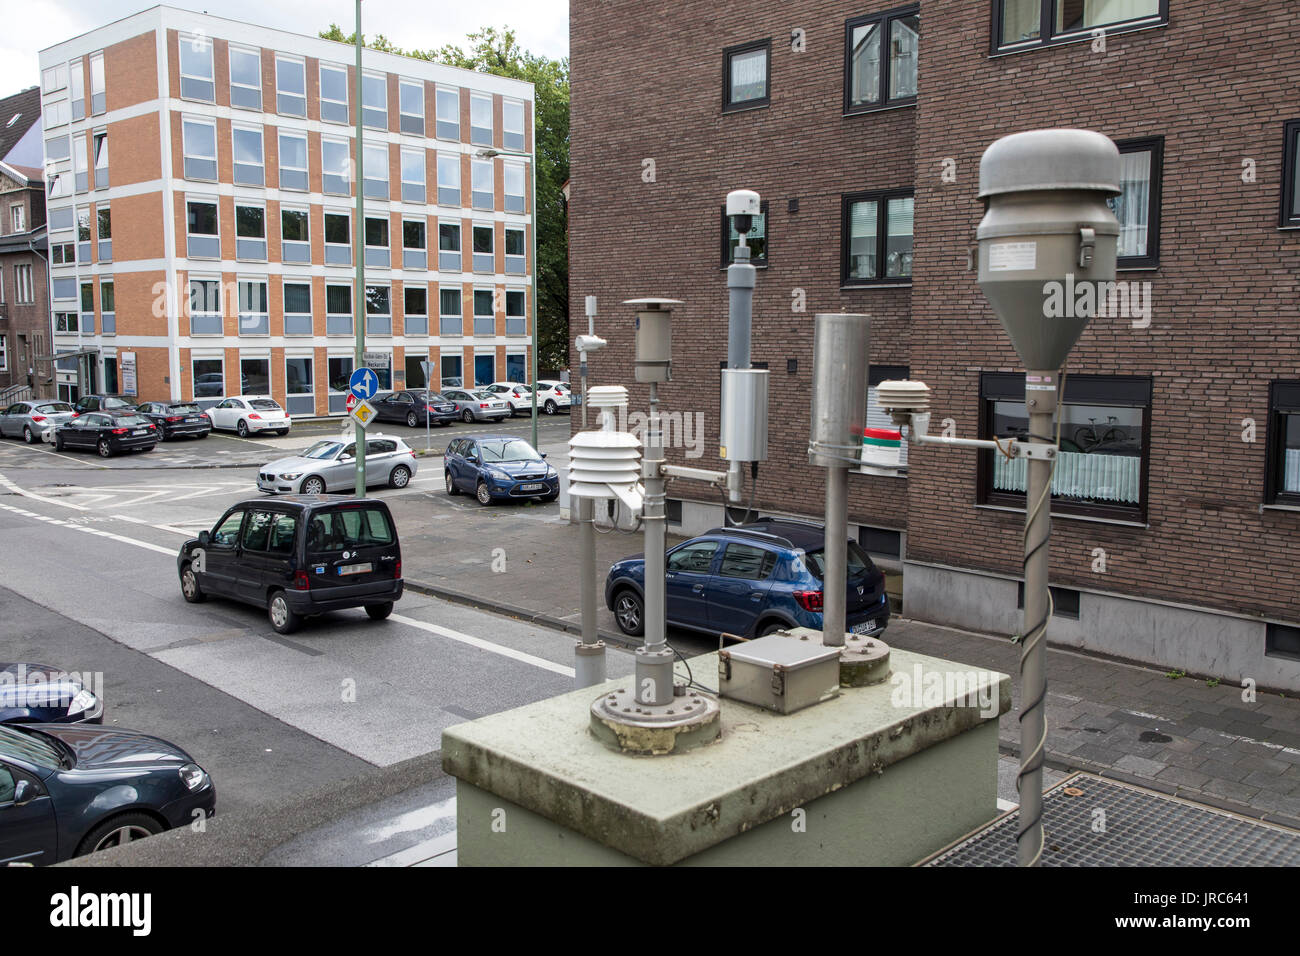 State  Air measuring station, to check the air quality, on an inner city street in Duisburg, Germany, Stock Photo